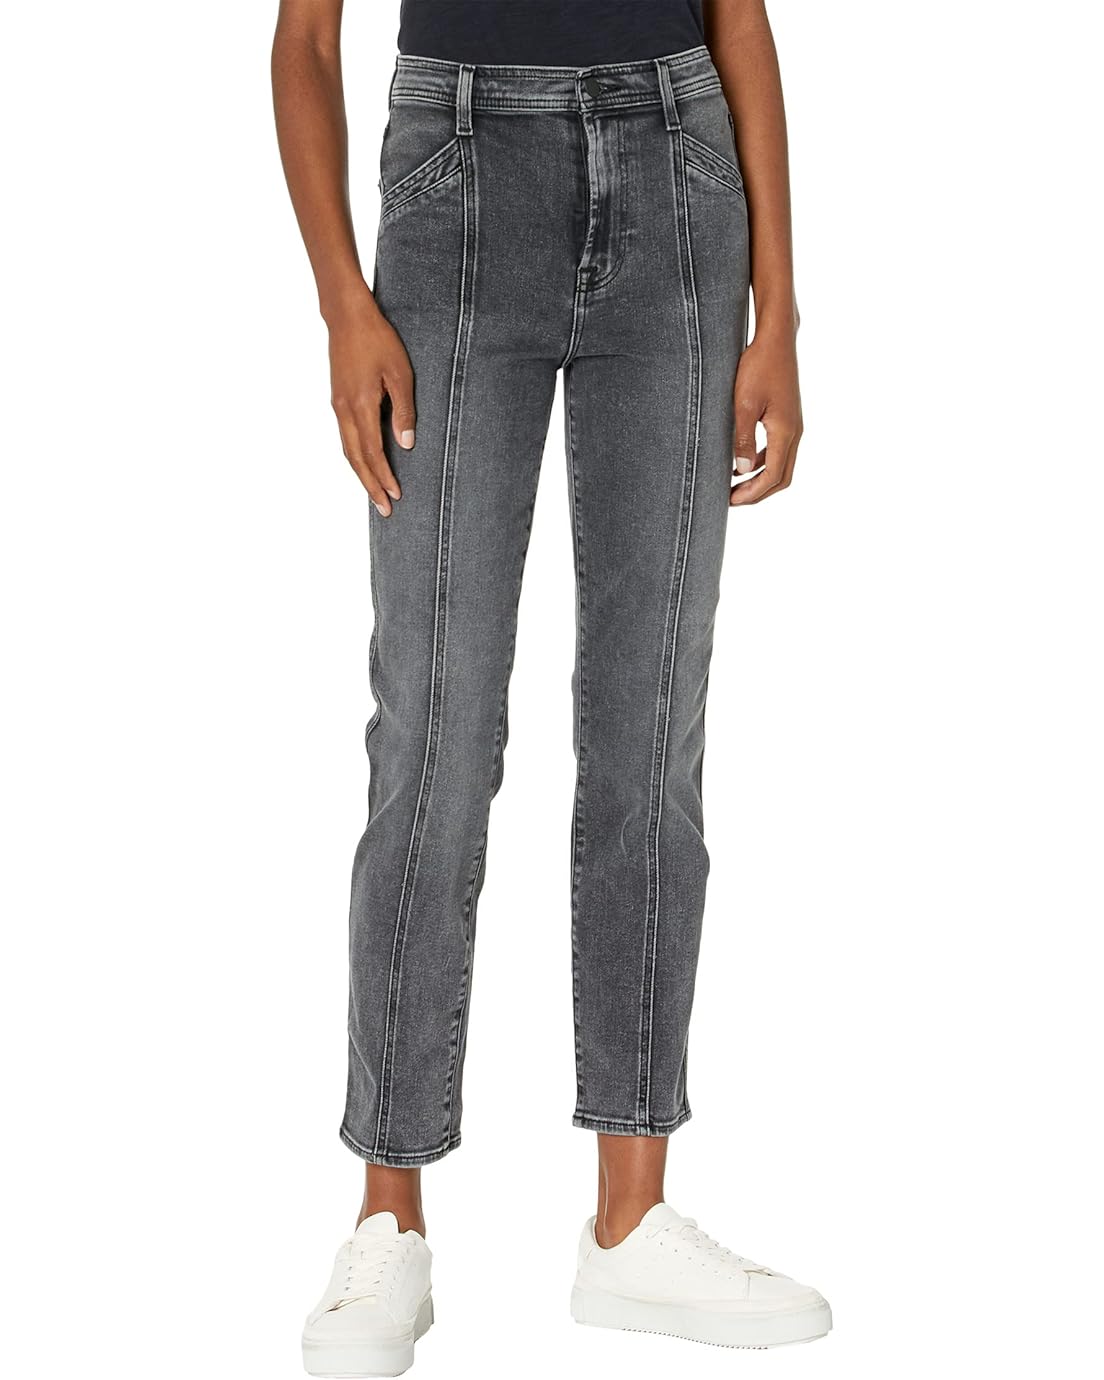 7 For All Mankind The Seamed Jeans in LV Abbey